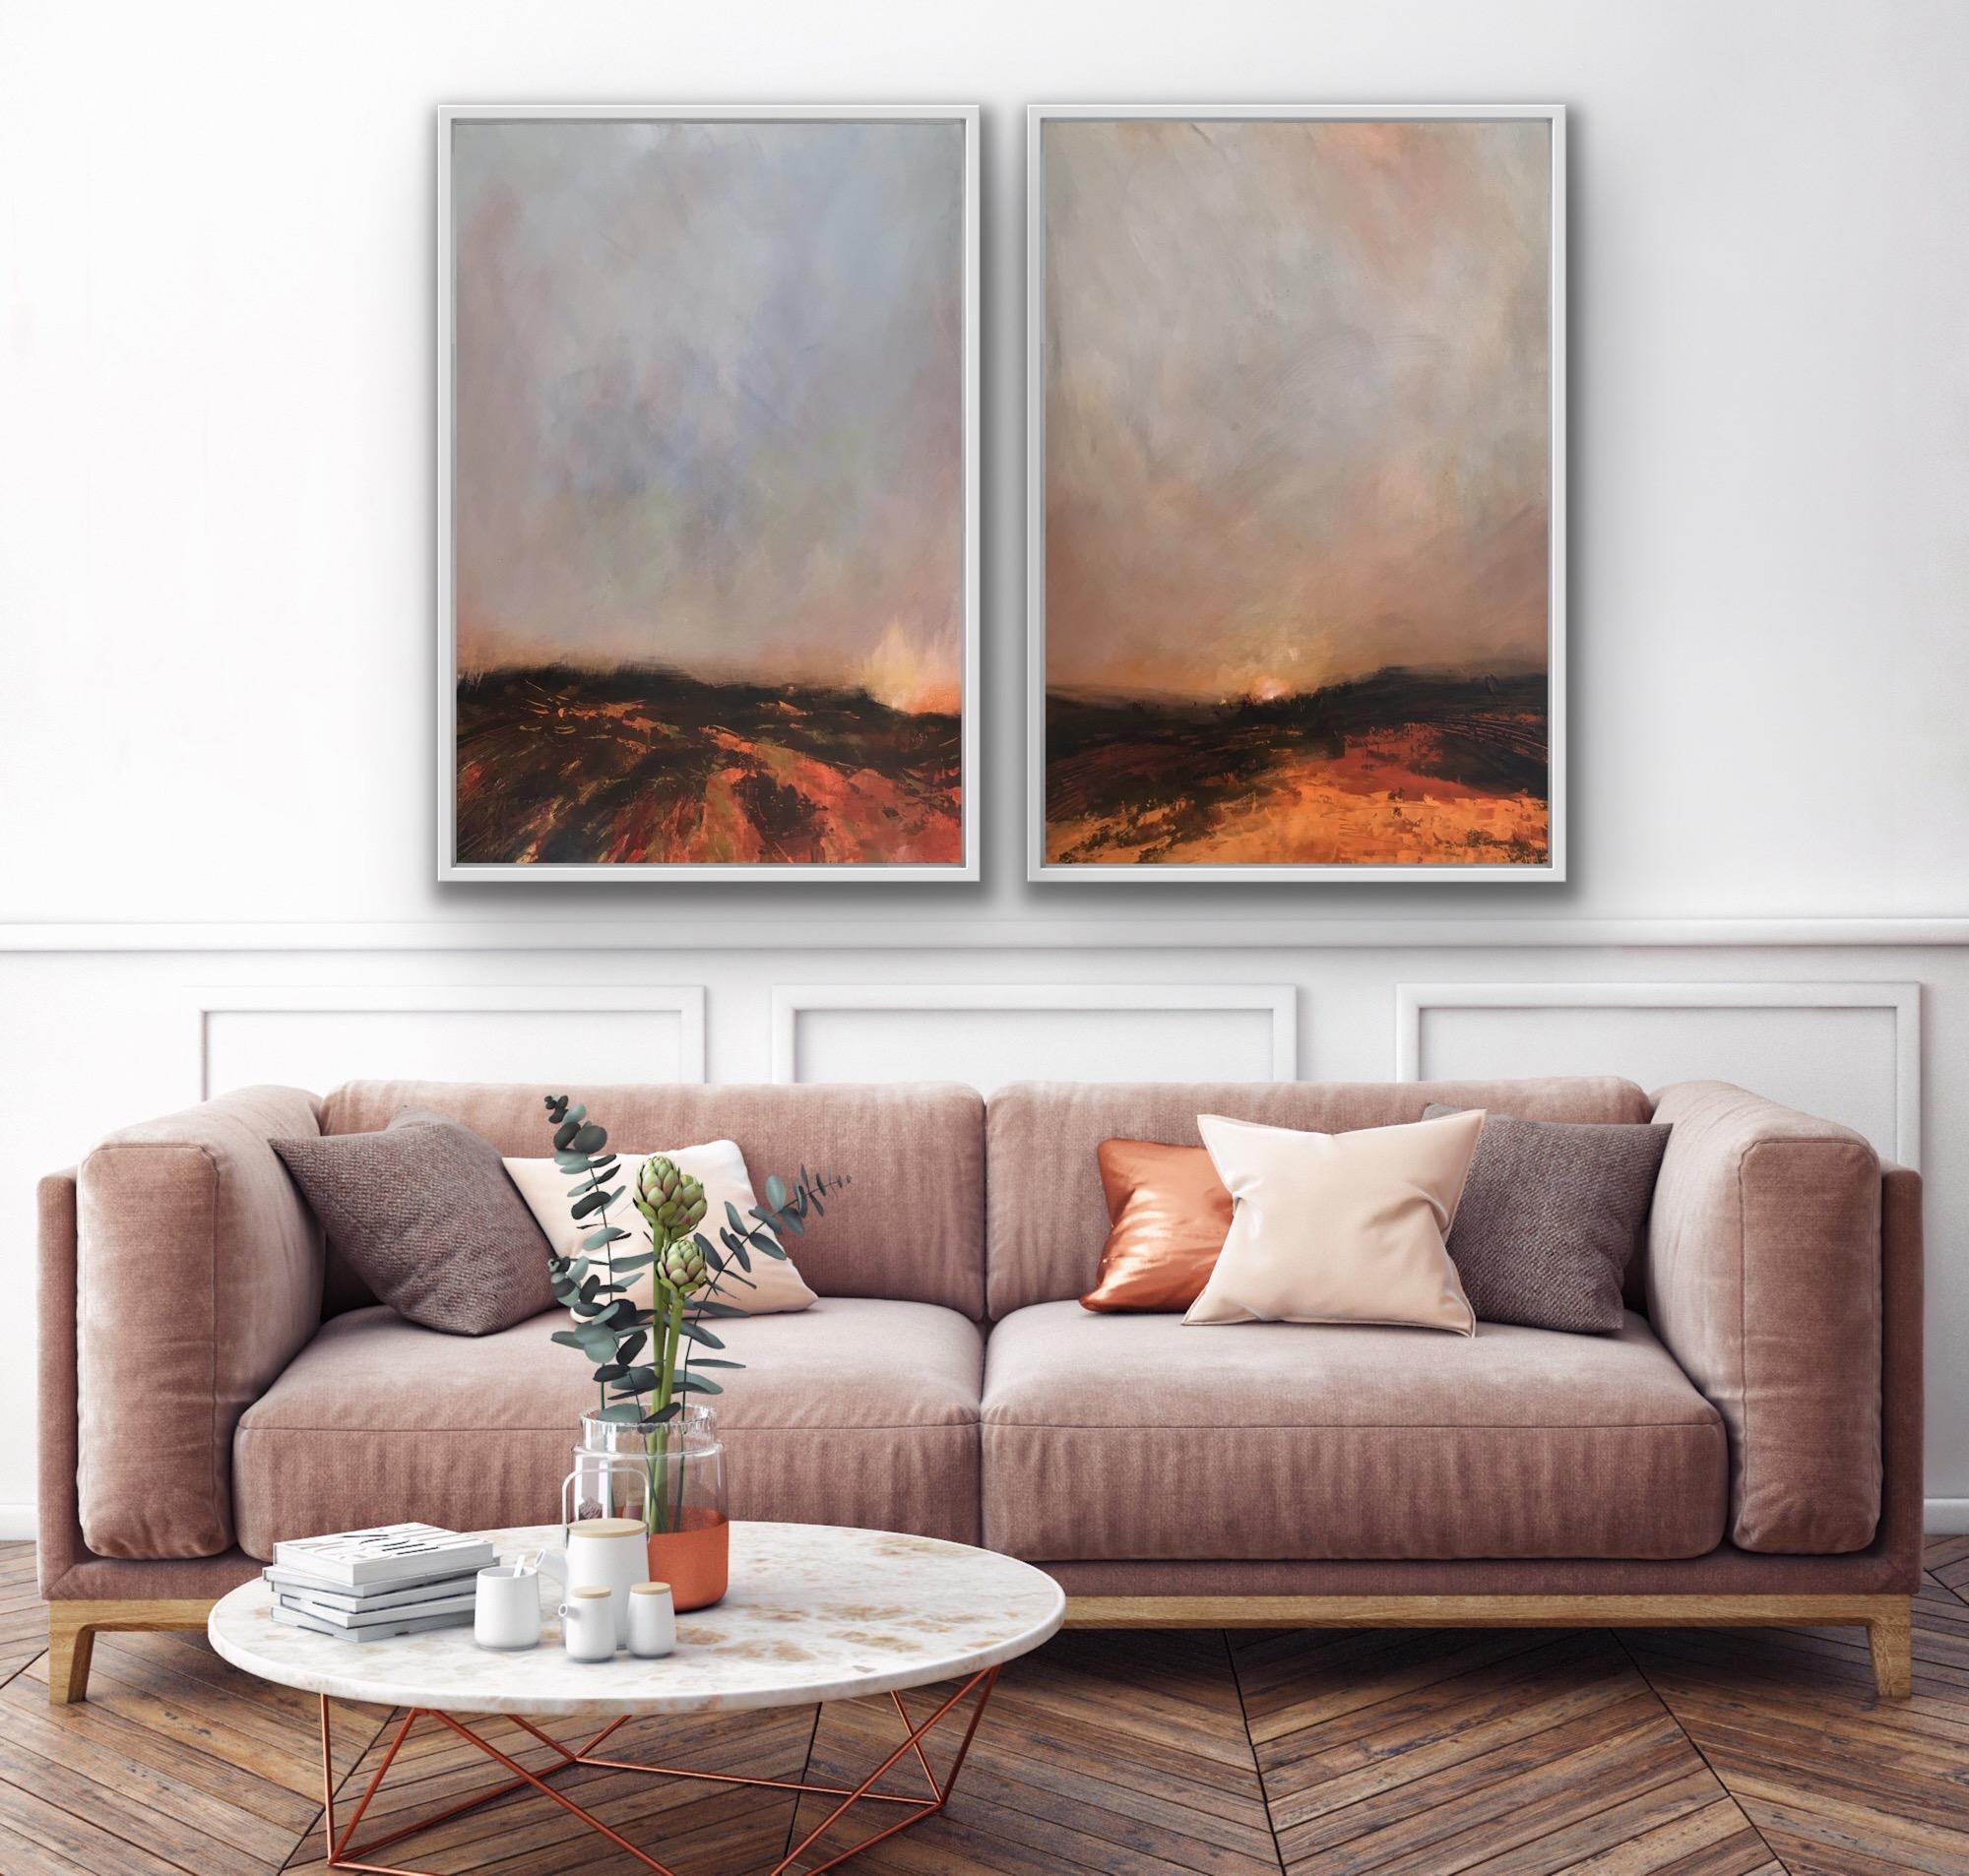  Hilltop and Hillside Diptych [2022]

original
Acrylic on canvas
Image size: H:100 cm x W:70 cm
Complete Size of Unframed Work: H:100 cm x W:140 cm x D:3cm
Sold Unframed
Please note that insitu images are purely an indication of how a piece may